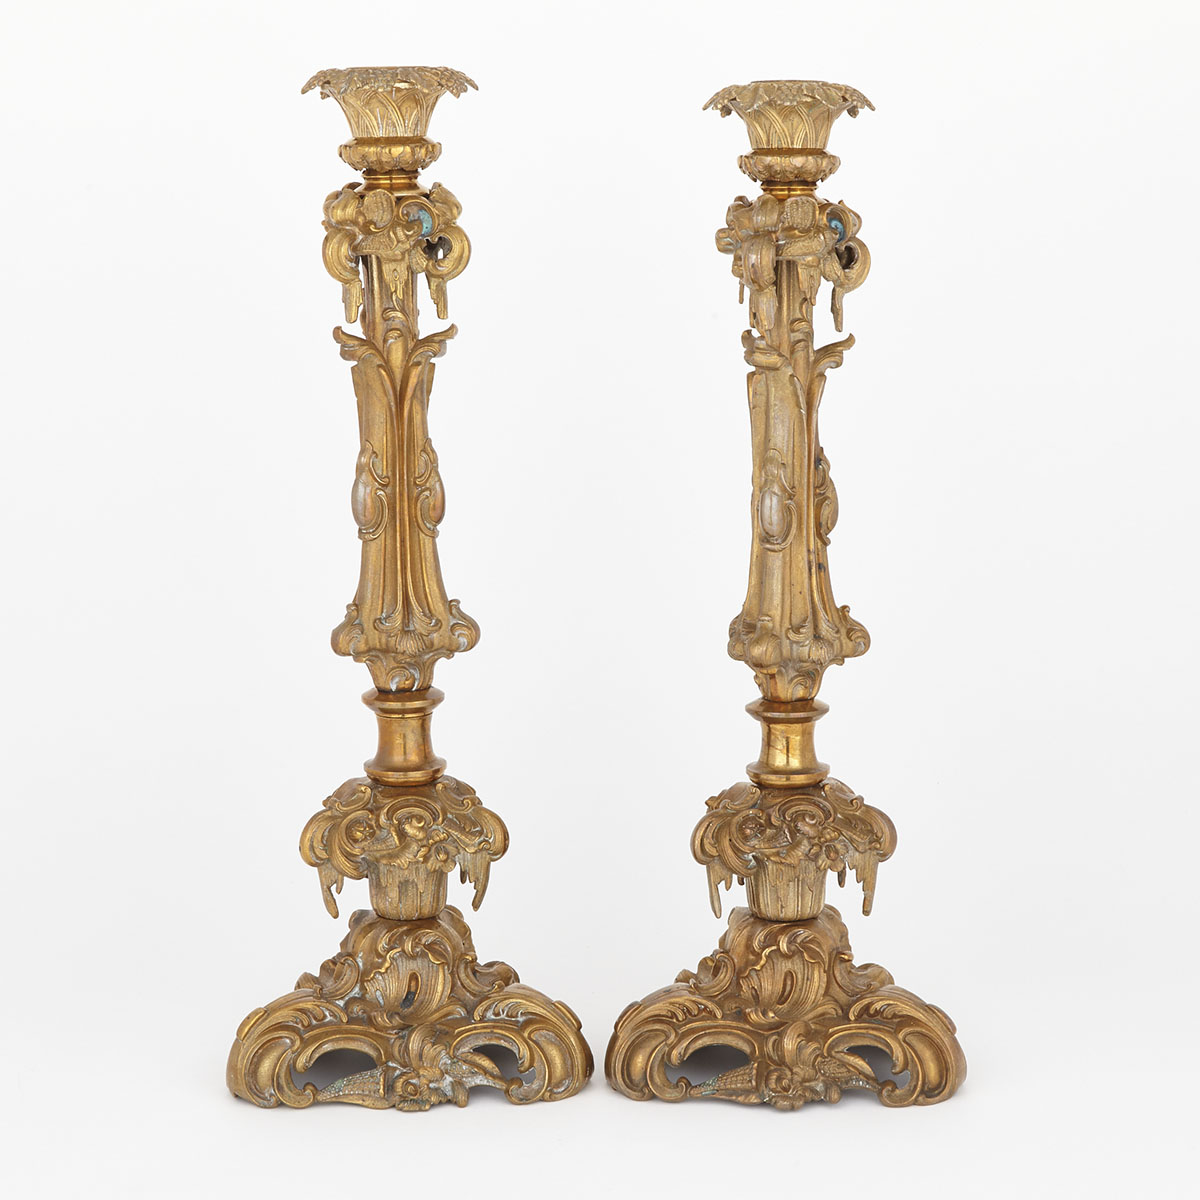 Large Pair of Rococo Style Gilt Bronze Altar Candlesticks, 19th century